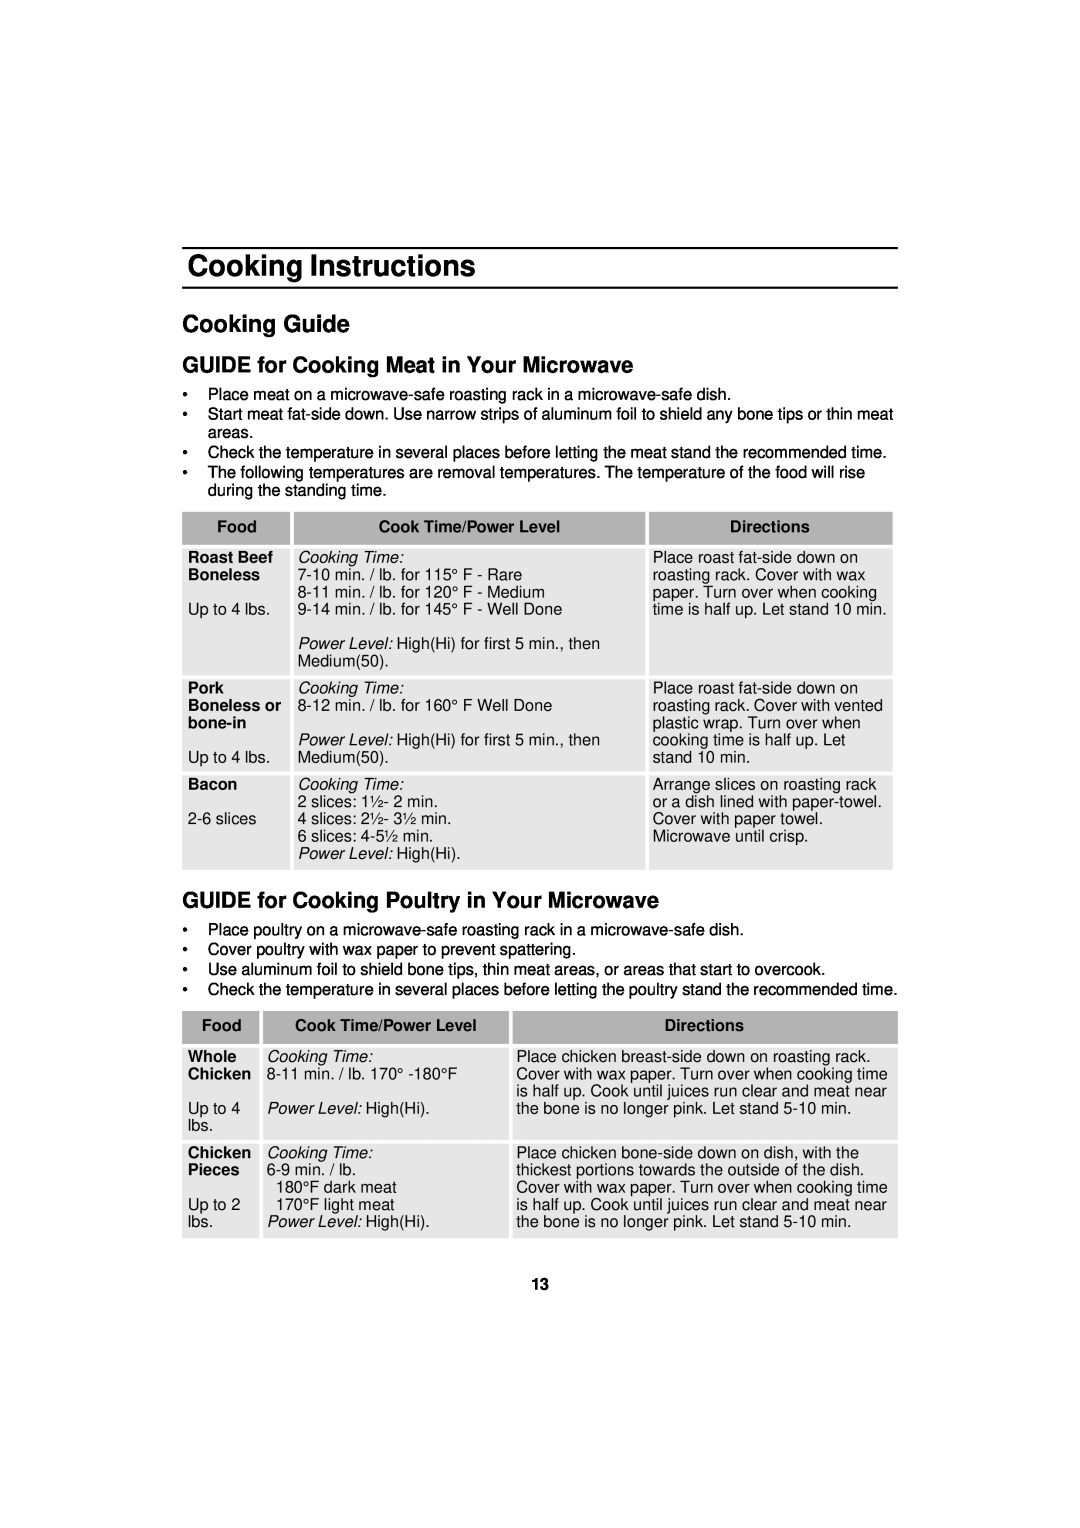 Samsung MW830BA manual Cooking Guide, GUIDE for Cooking Meat in Your Microwave, GUIDE for Cooking Poultry in Your Microwave 